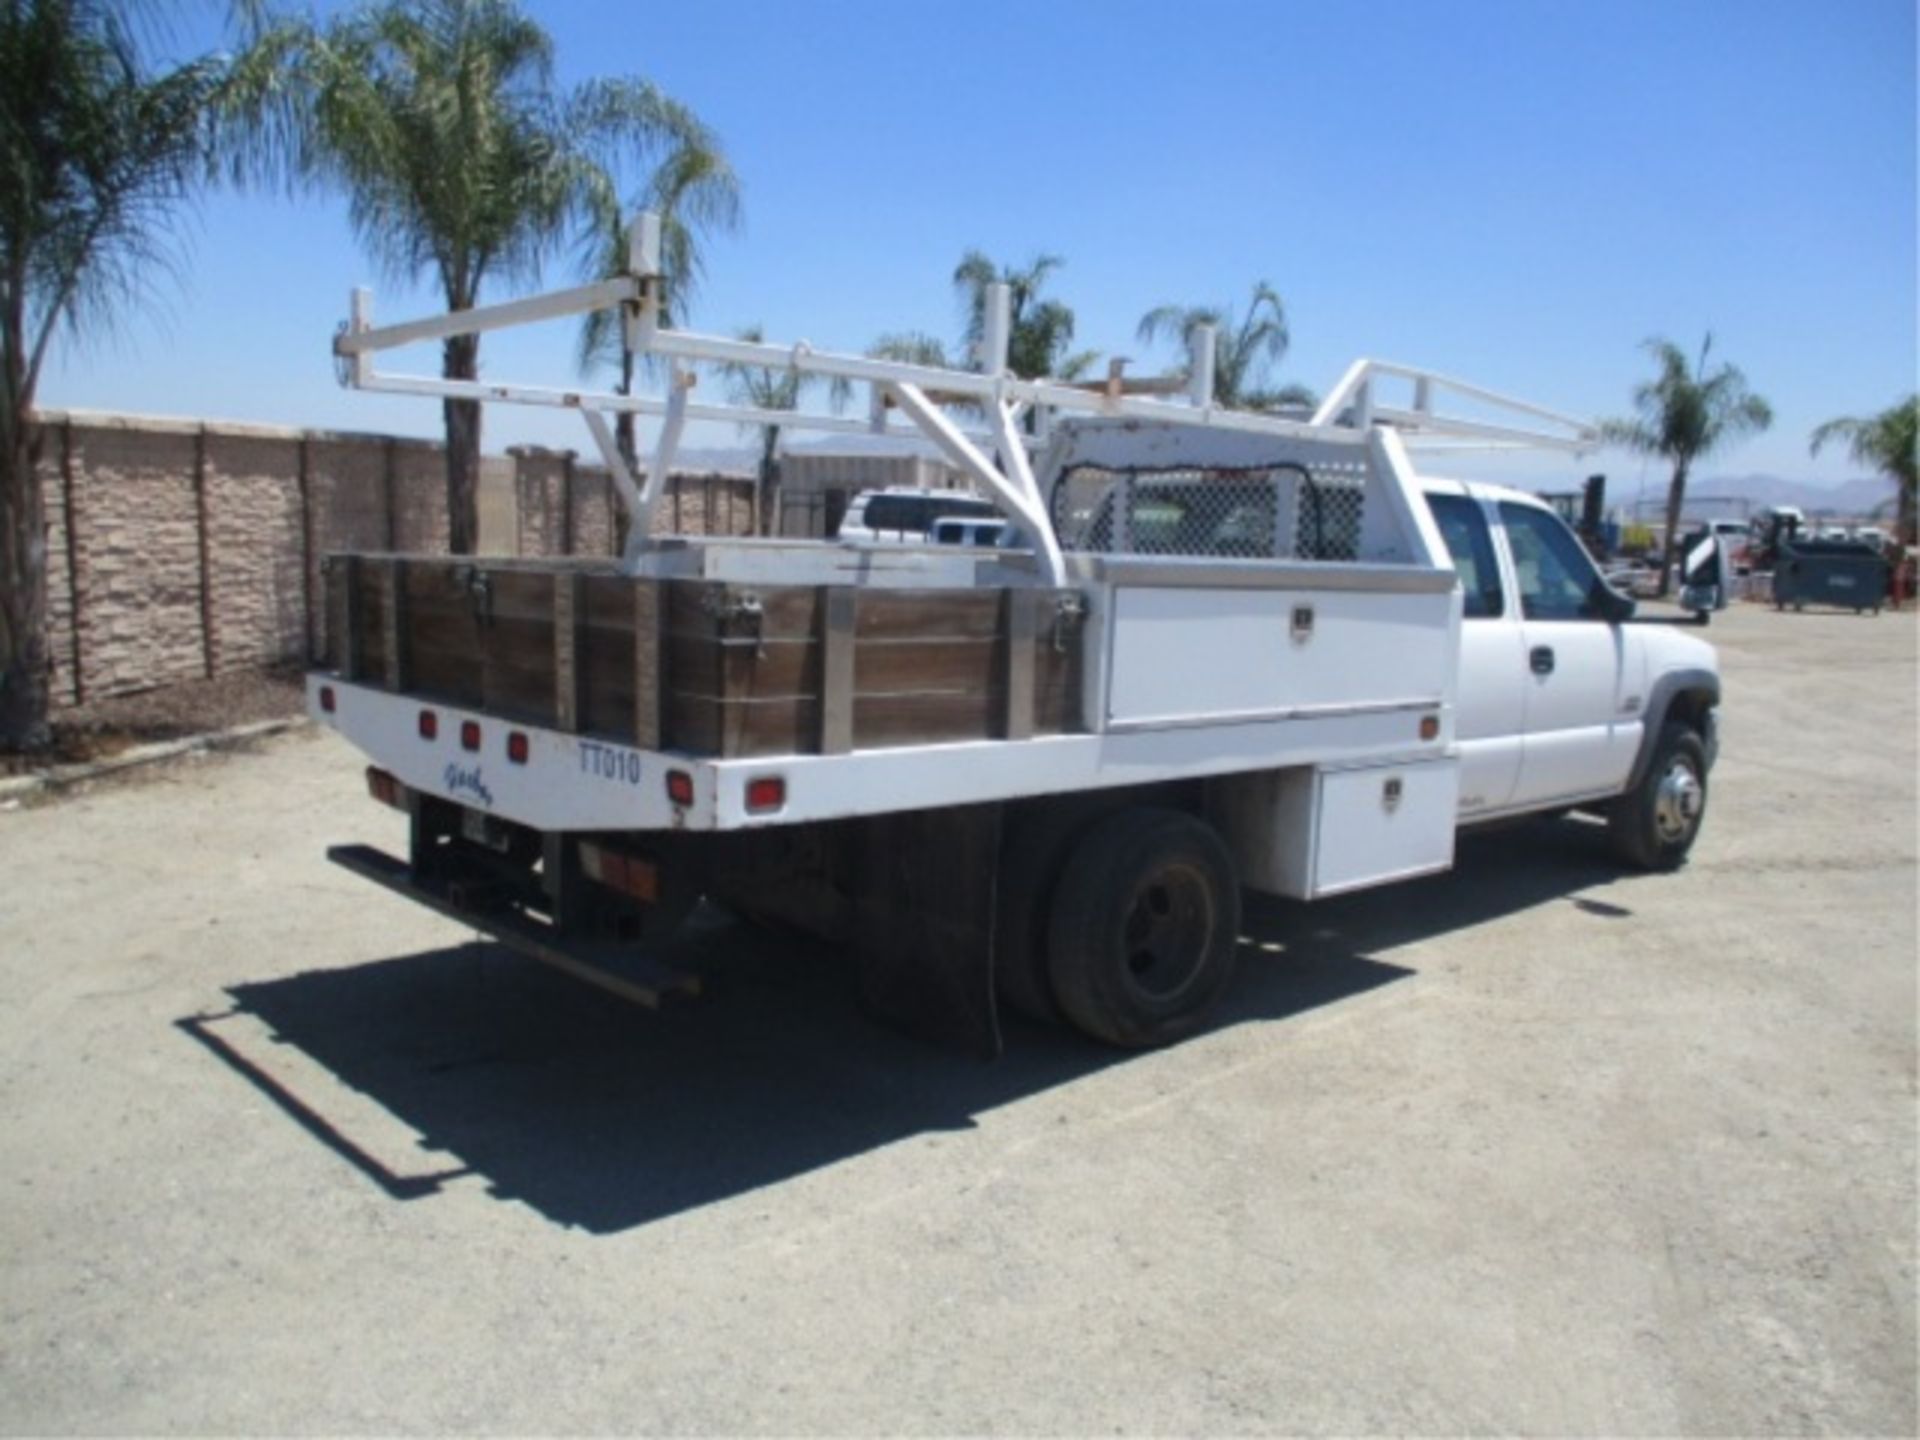 2006 Chevrolet 3500 Extended-Cab Utility Truck, 6.6L Turbo Diesel, Automatic, Tool Boxes, Lumber - Image 13 of 71